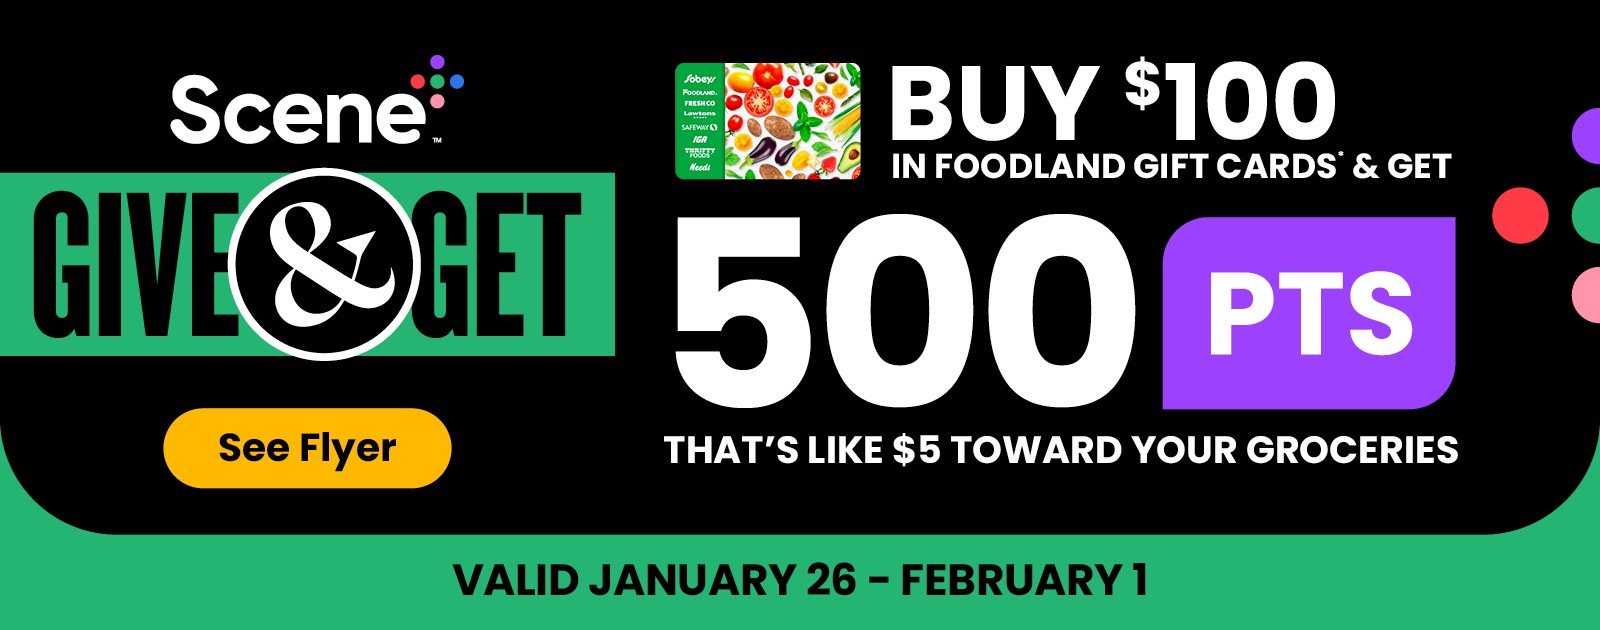 Text Reading ‘Give & Get Scene Plus. Spend $100 in Foodland gift cards and get 500 points. That's like $5 toward your groceries. Offer valid from January 26 to February 1, 2023. Check out the Flyer with the ‘See Flyer’ button given at the left end.'